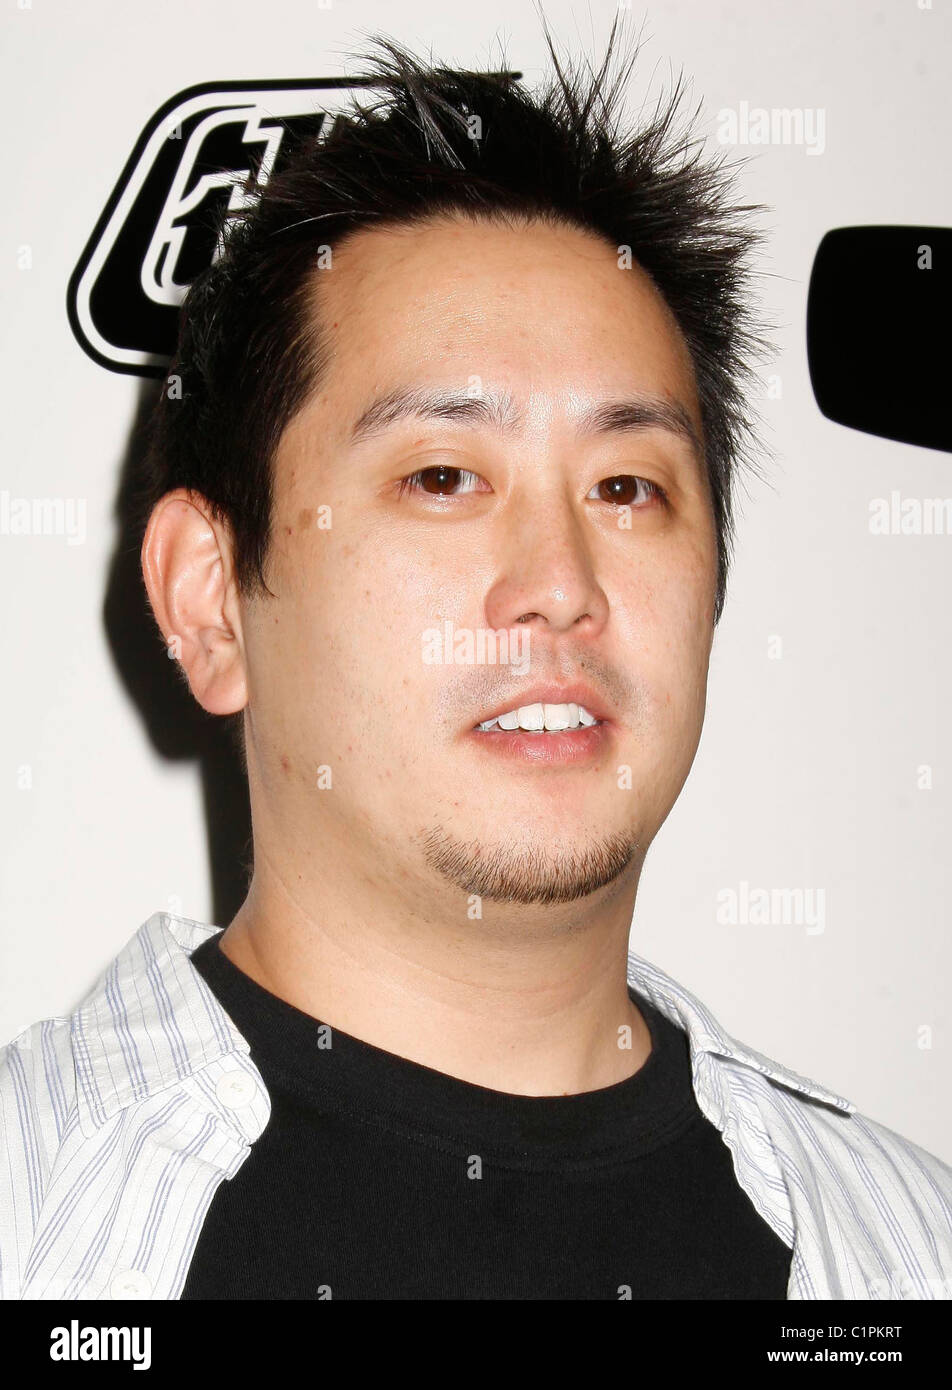 Joseph Hahn of 'Linkin Park' Riders For Health Benefit Event held at SURU on Melrose Avenue Los Angeles, California - 11.07.09 Stock Photo